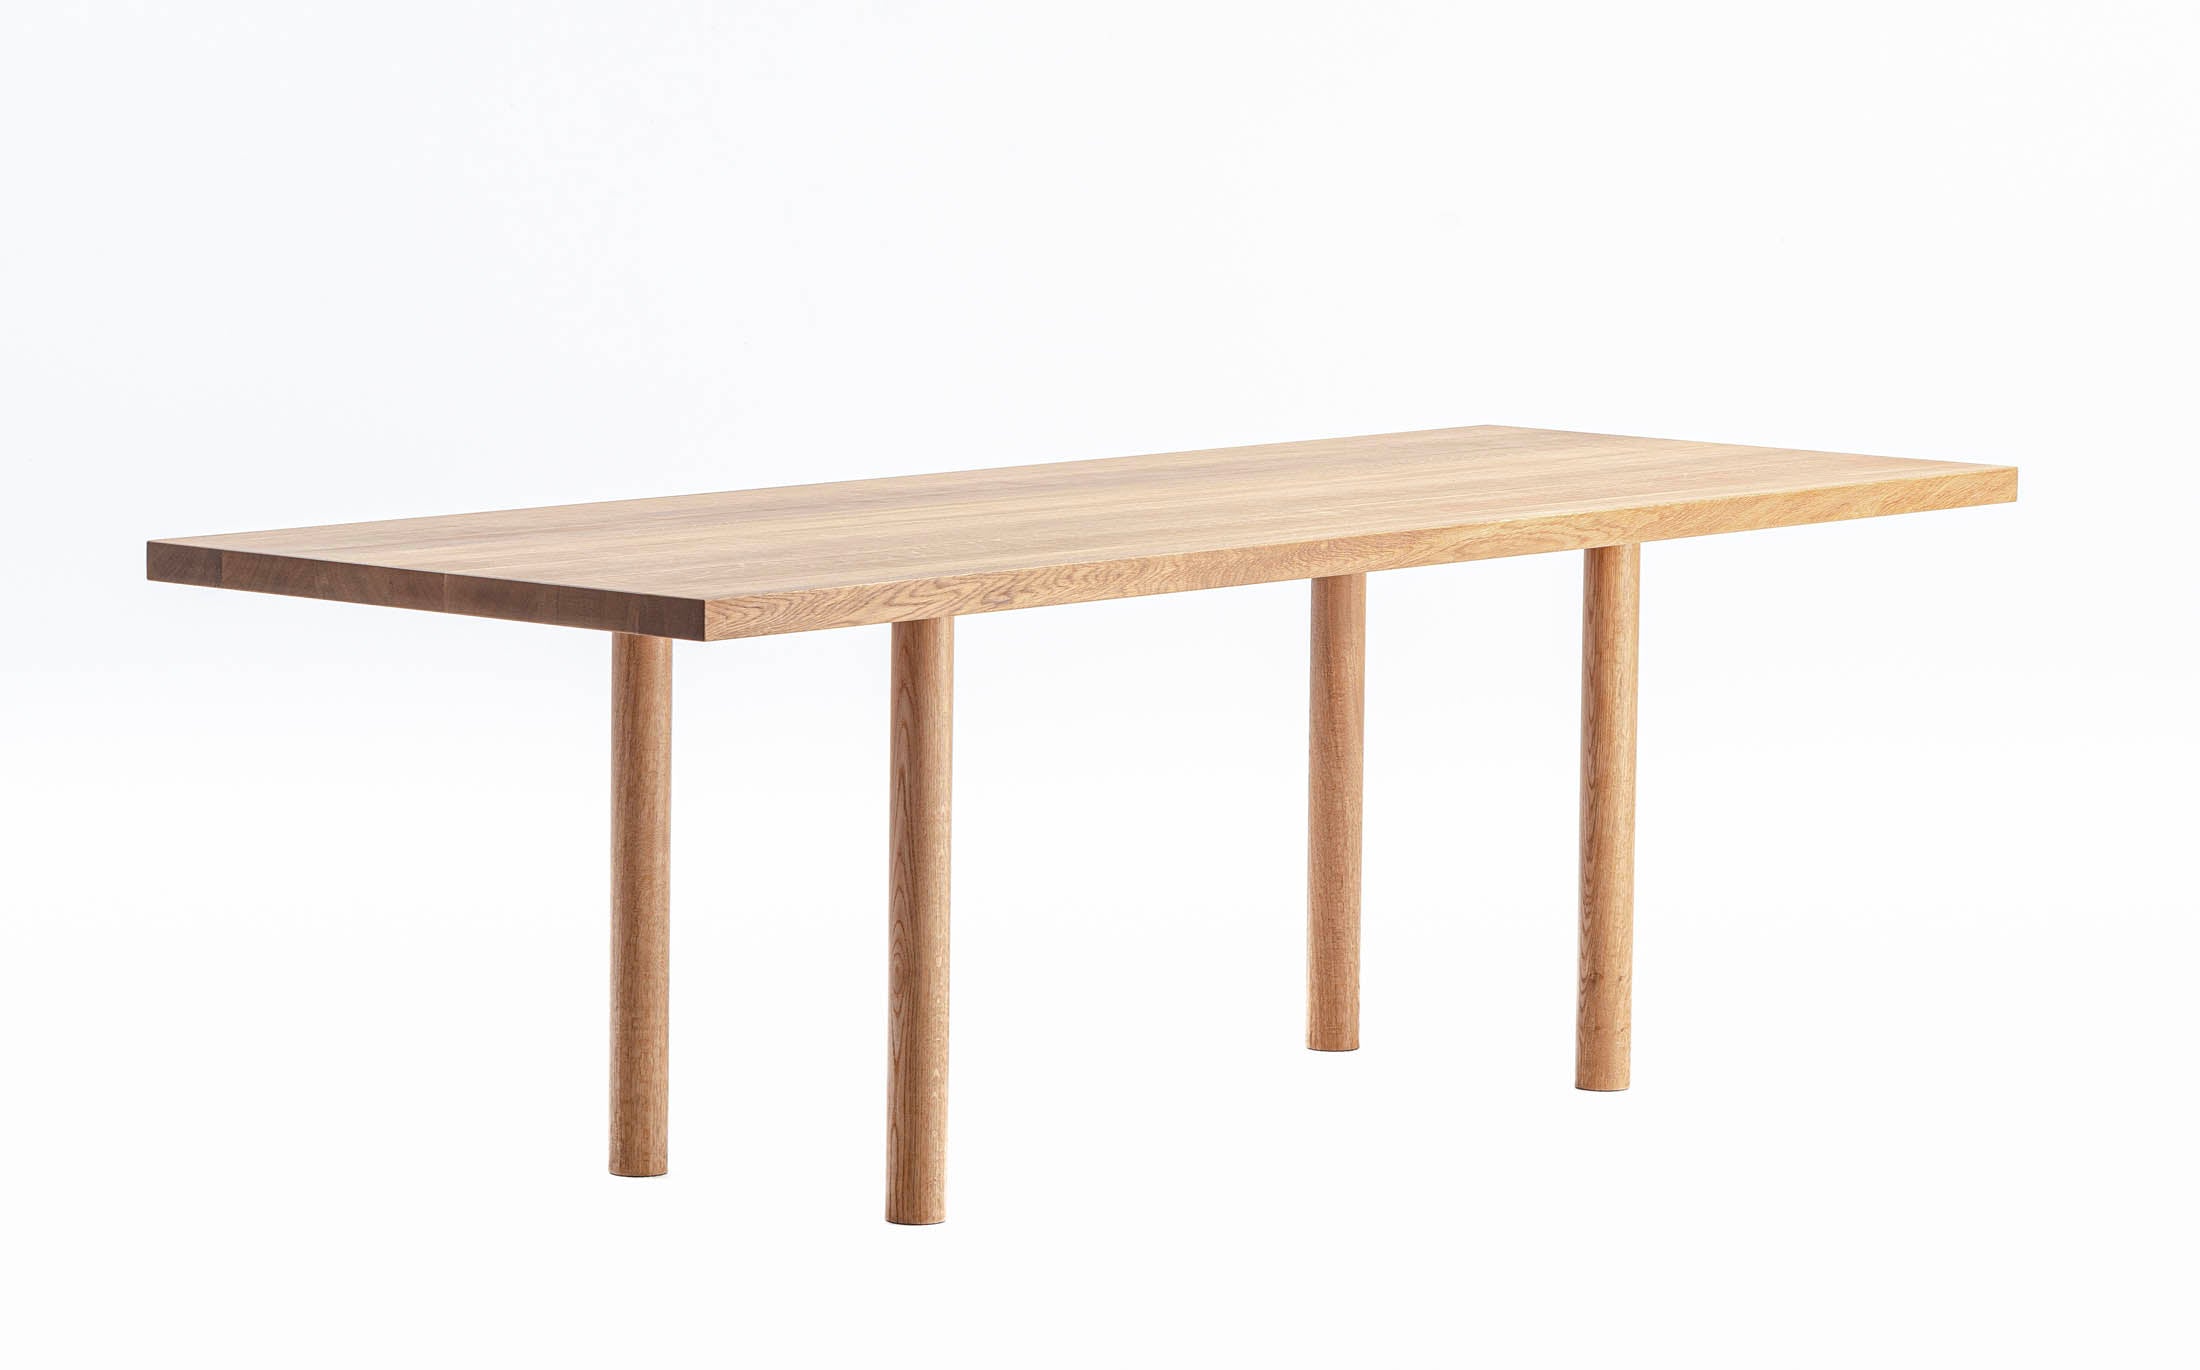 Atelier Zumthor working table - Round legs #Wood Finish_beeswax